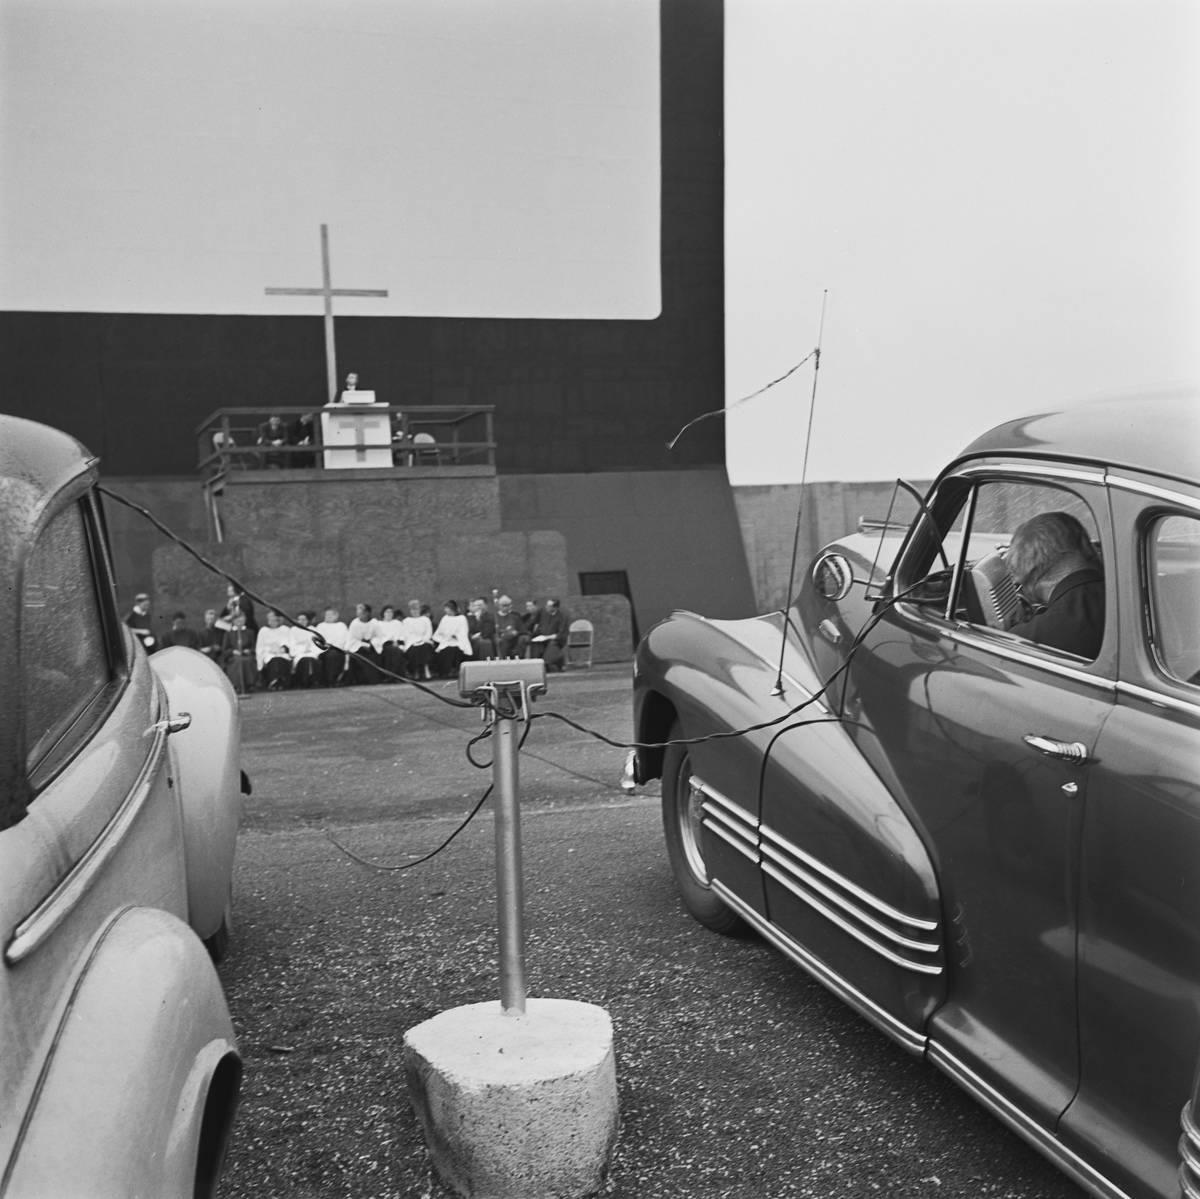 <p>Even in the 1950s, bringing your crush or partner to see the latest film after a nice dinner out was high on the "date list." Only going to the theater looked a bit different. Instead of going to a traditional theater with a huge marquee, a lot of young people opted for the drive-in.</p> <p>This way, they could be alone in a car, order food, and also socialize with other people their age. We hope no one reading this has ever been "stranded at the drive-in" like Danny Zucko!</p>